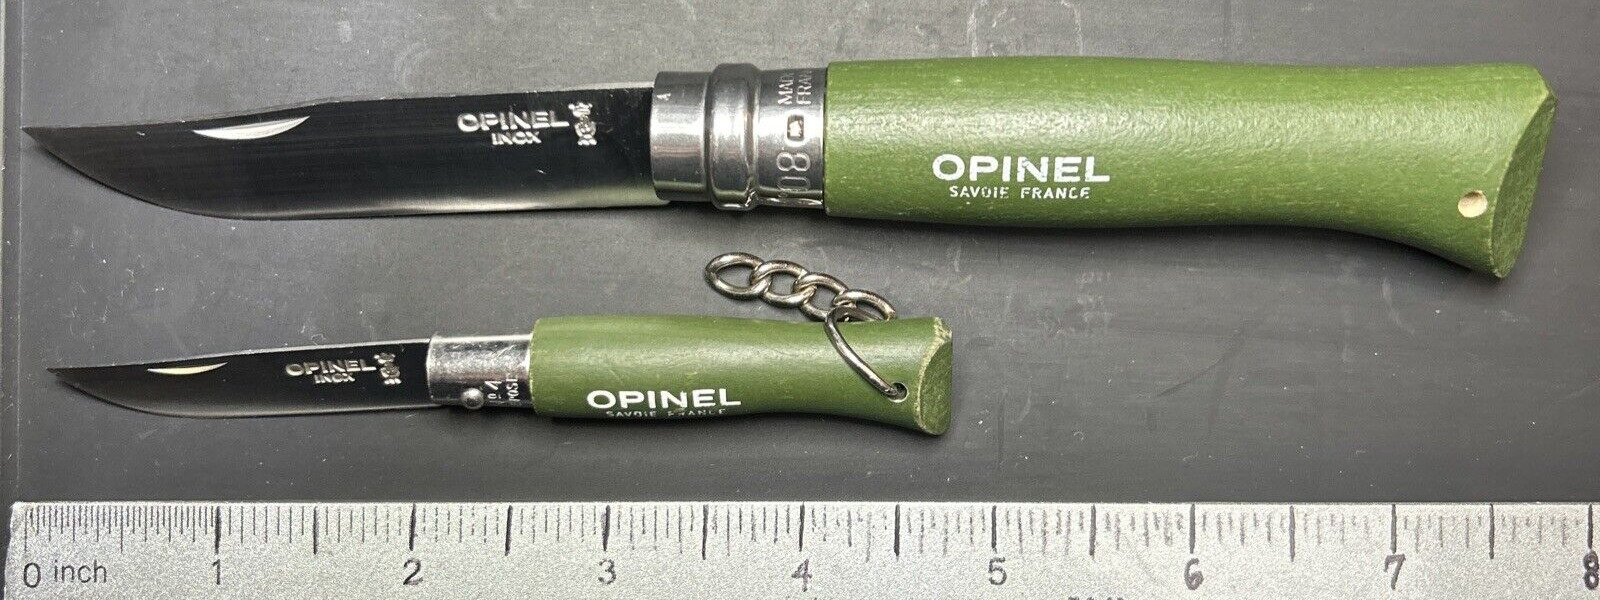 Lot of 2 Opinel Inox Savoie France No 08 & No 04 Green Ring Lock Folding Knives